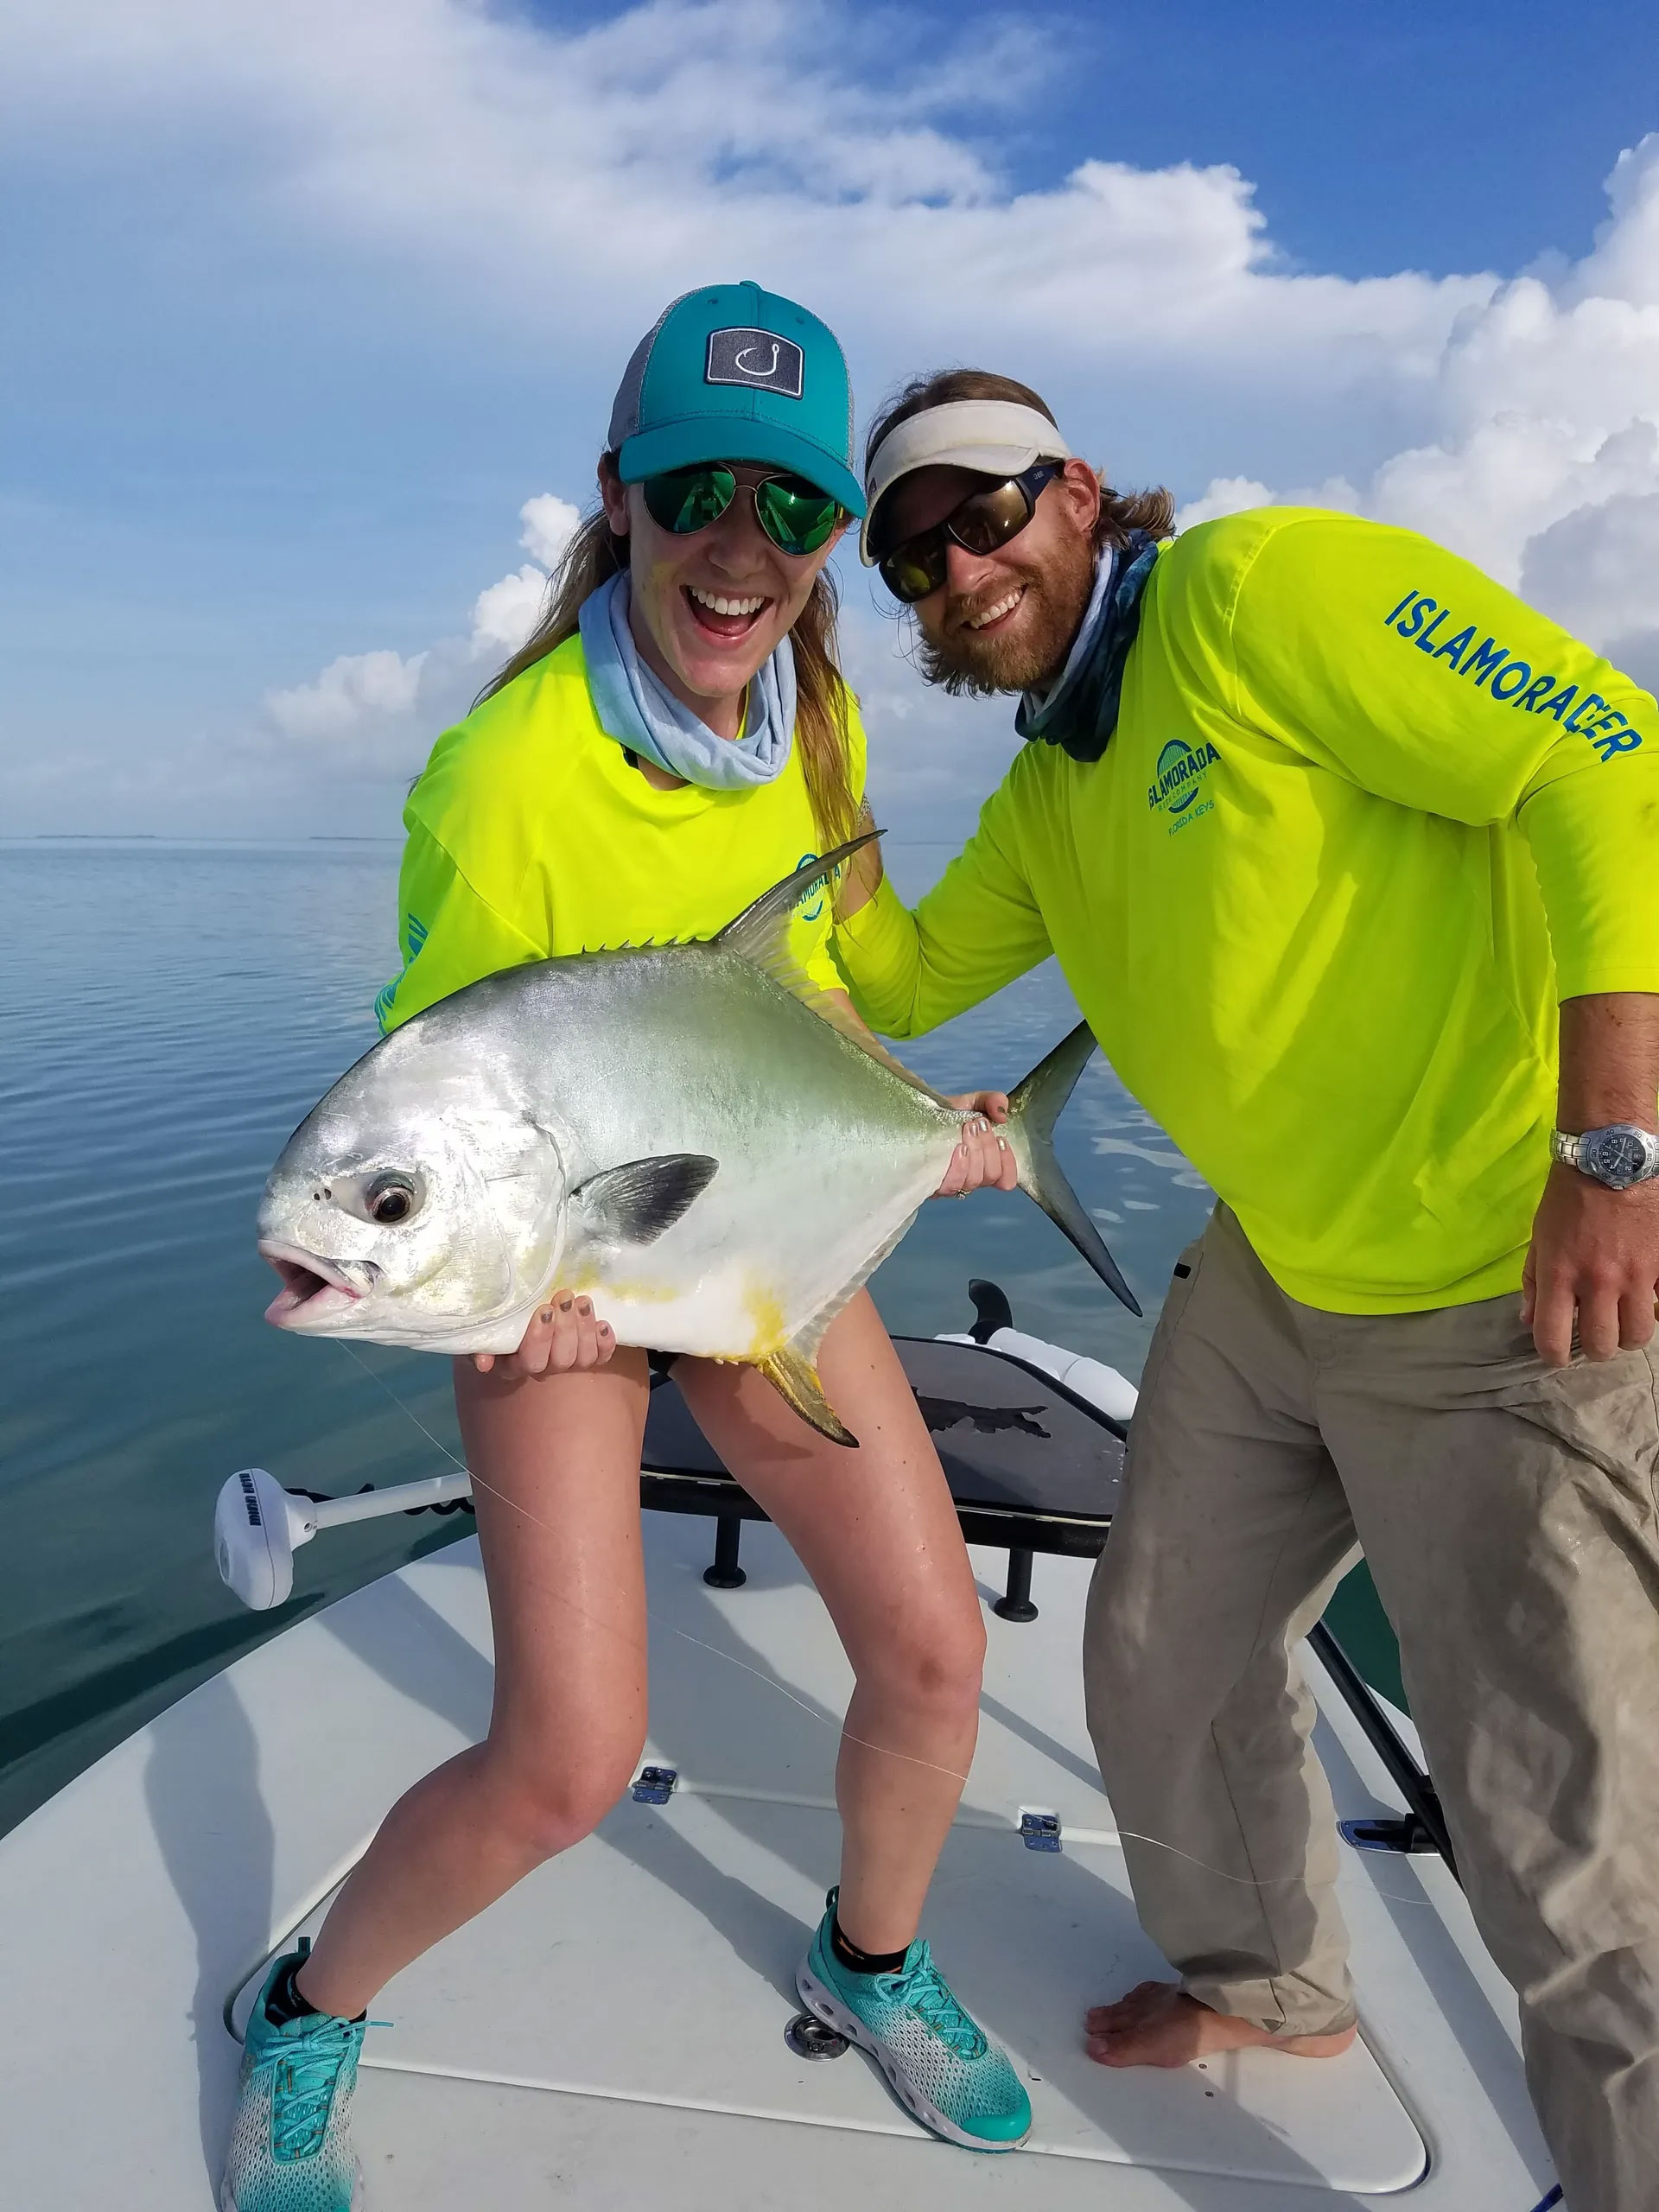 Smiling couple holding a large fish